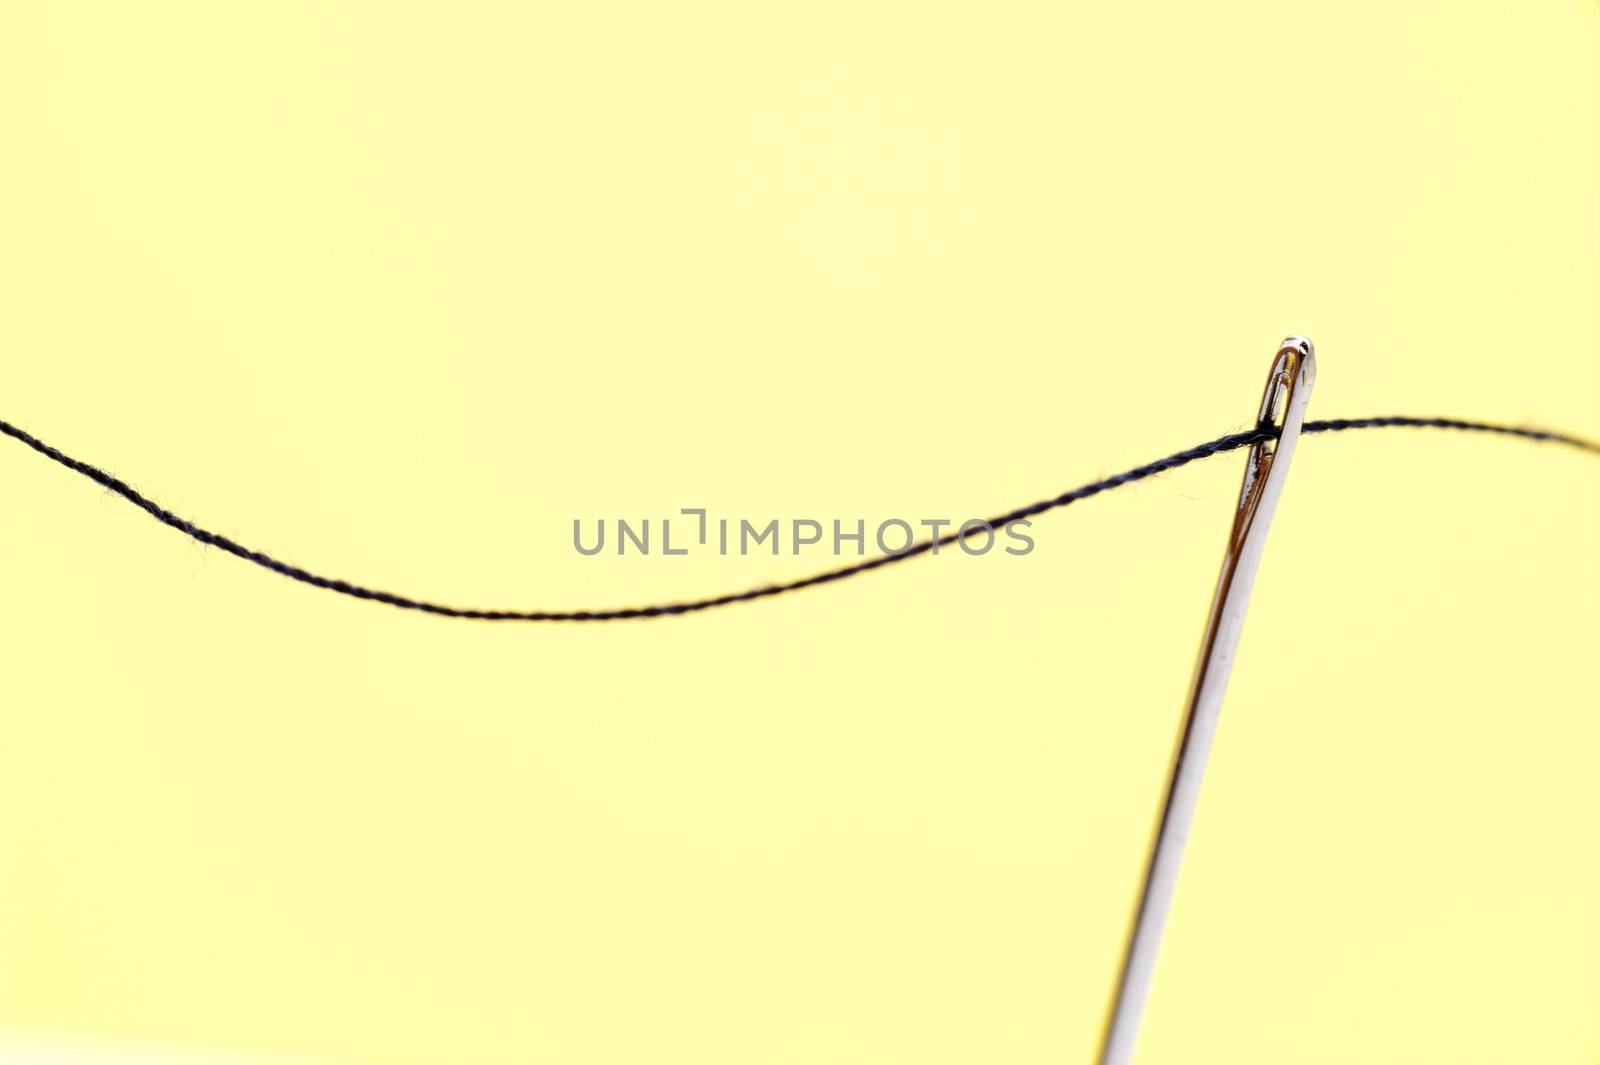 Threaded sewing needle with yarn over a yellow background with copyspace conceptual of sewing, needlework, tailoring or a seamstress